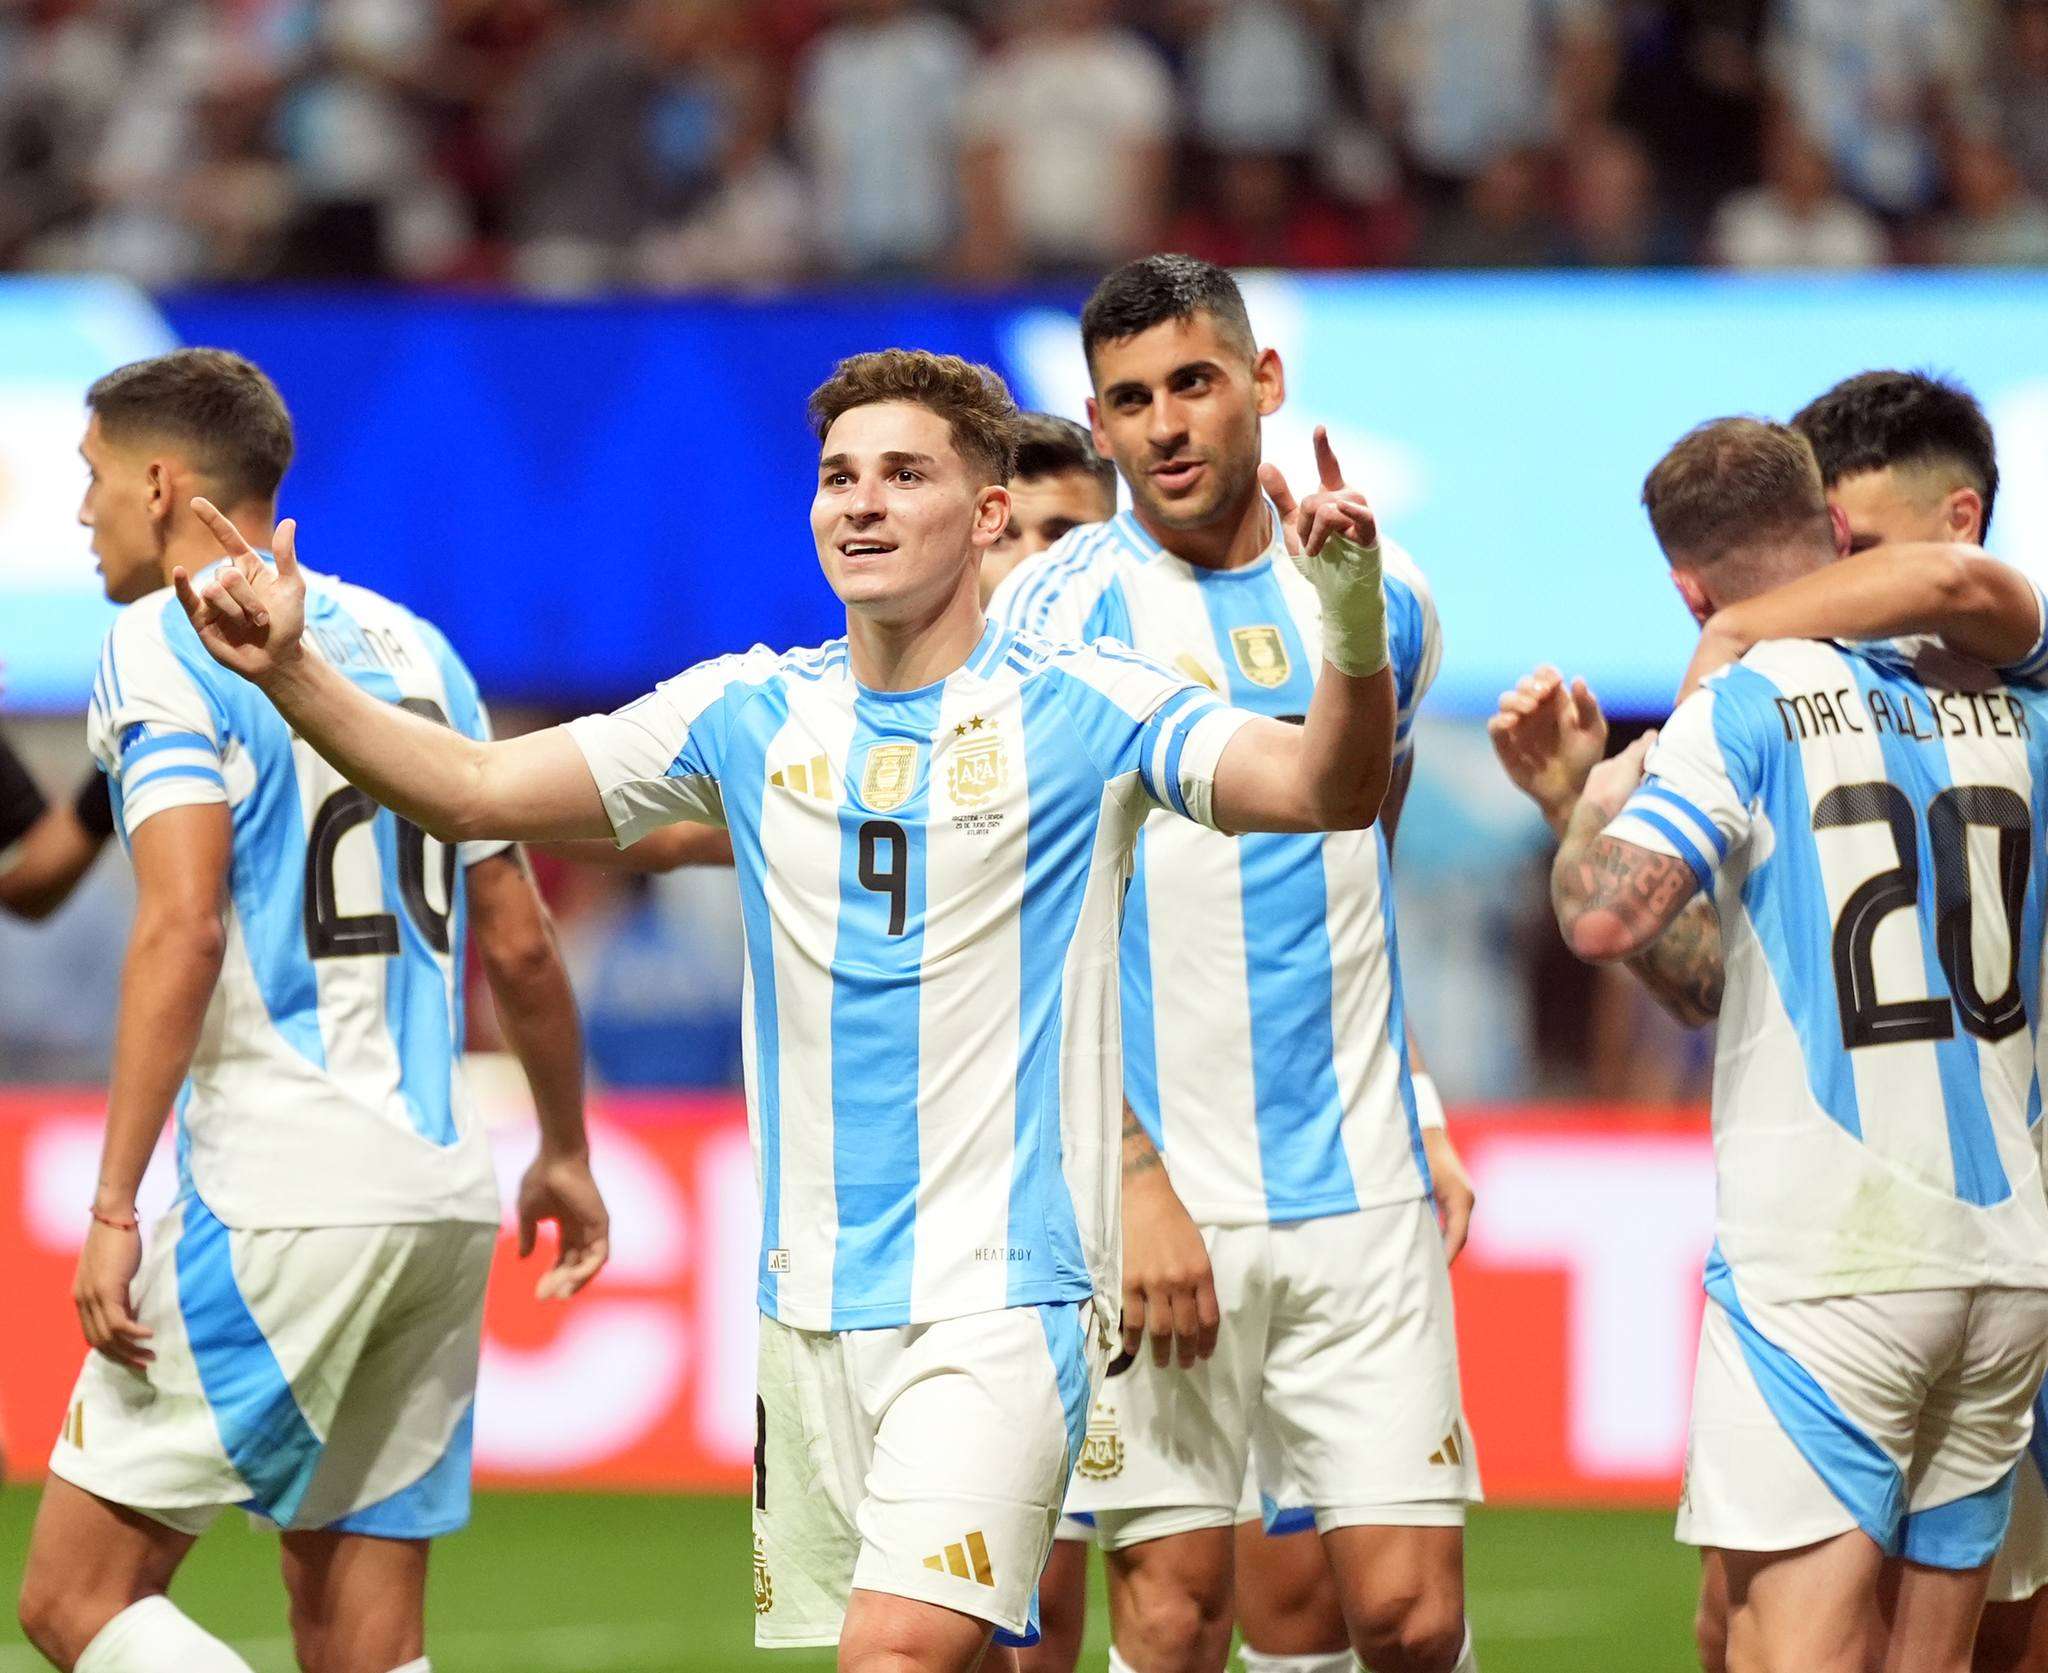 Lionel Messi and company kick off Copa America with shaky 2-0 win